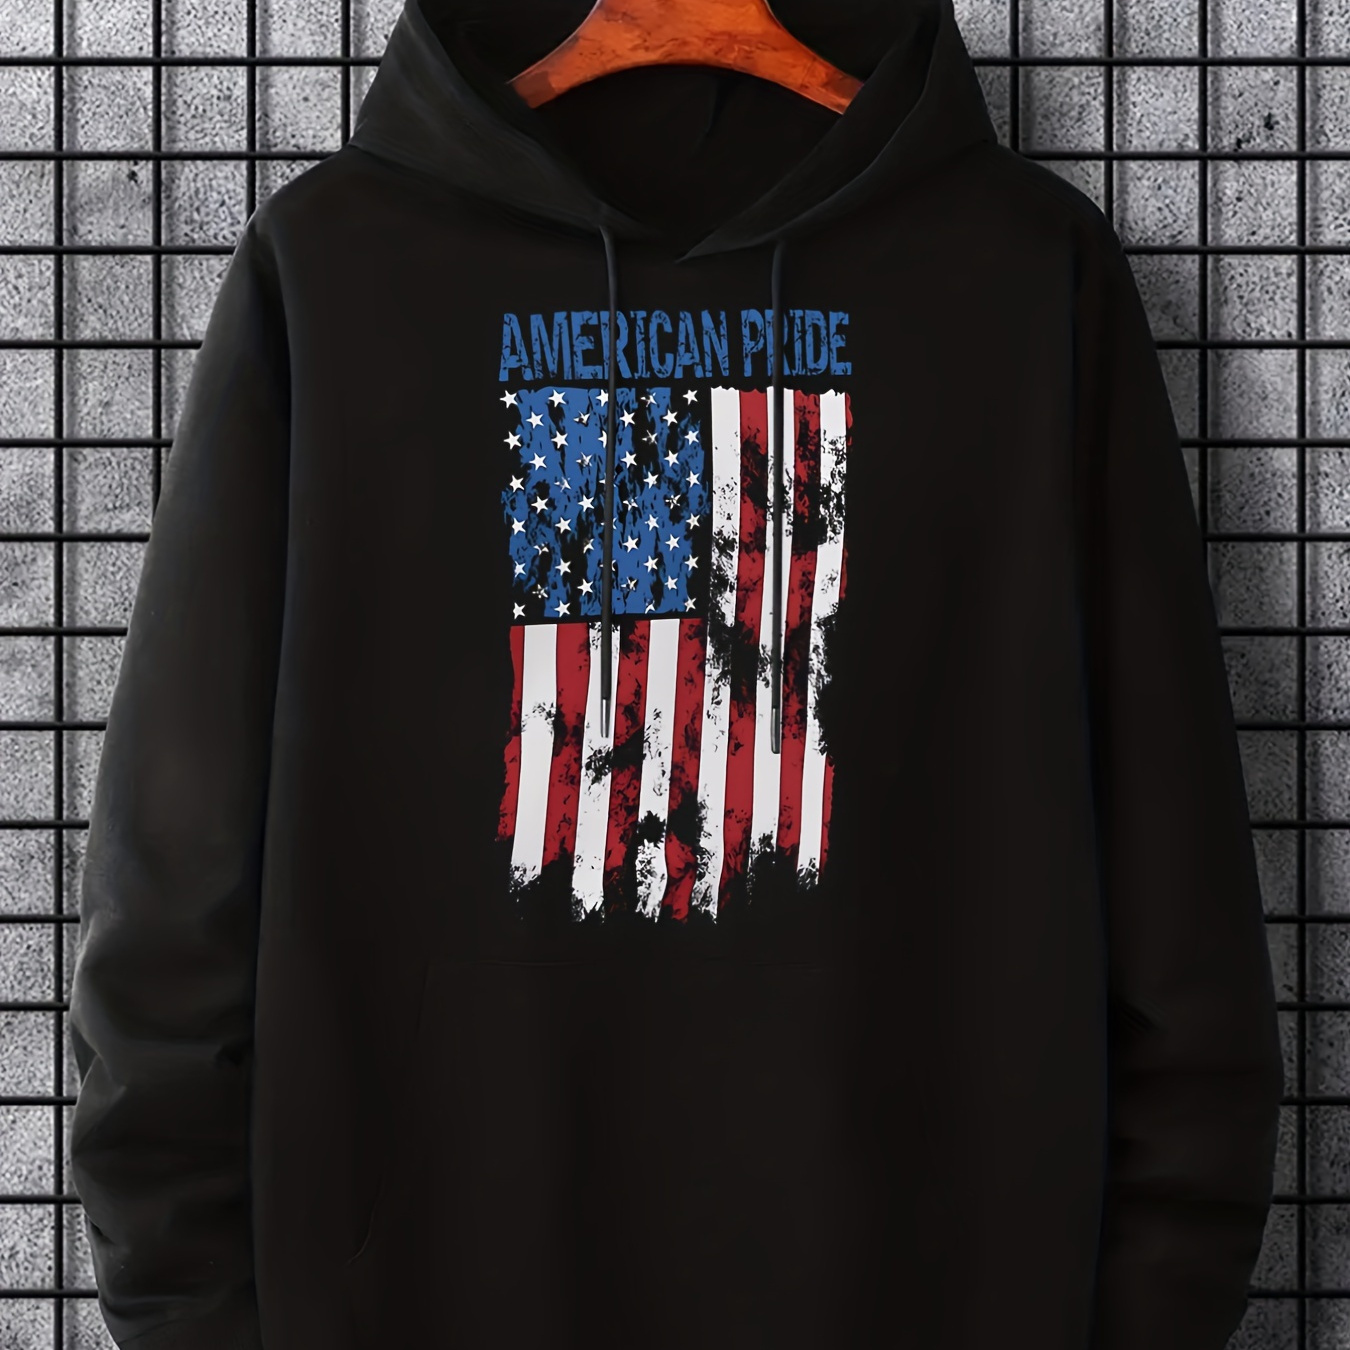 

Creative National Flag Patterns Print Hoodie, Hoodies For Men, Men's Casual Graphic Design Pullover Hooded Sweatshirt With Kangaroo Pocket For Spring Fall, As Gifts